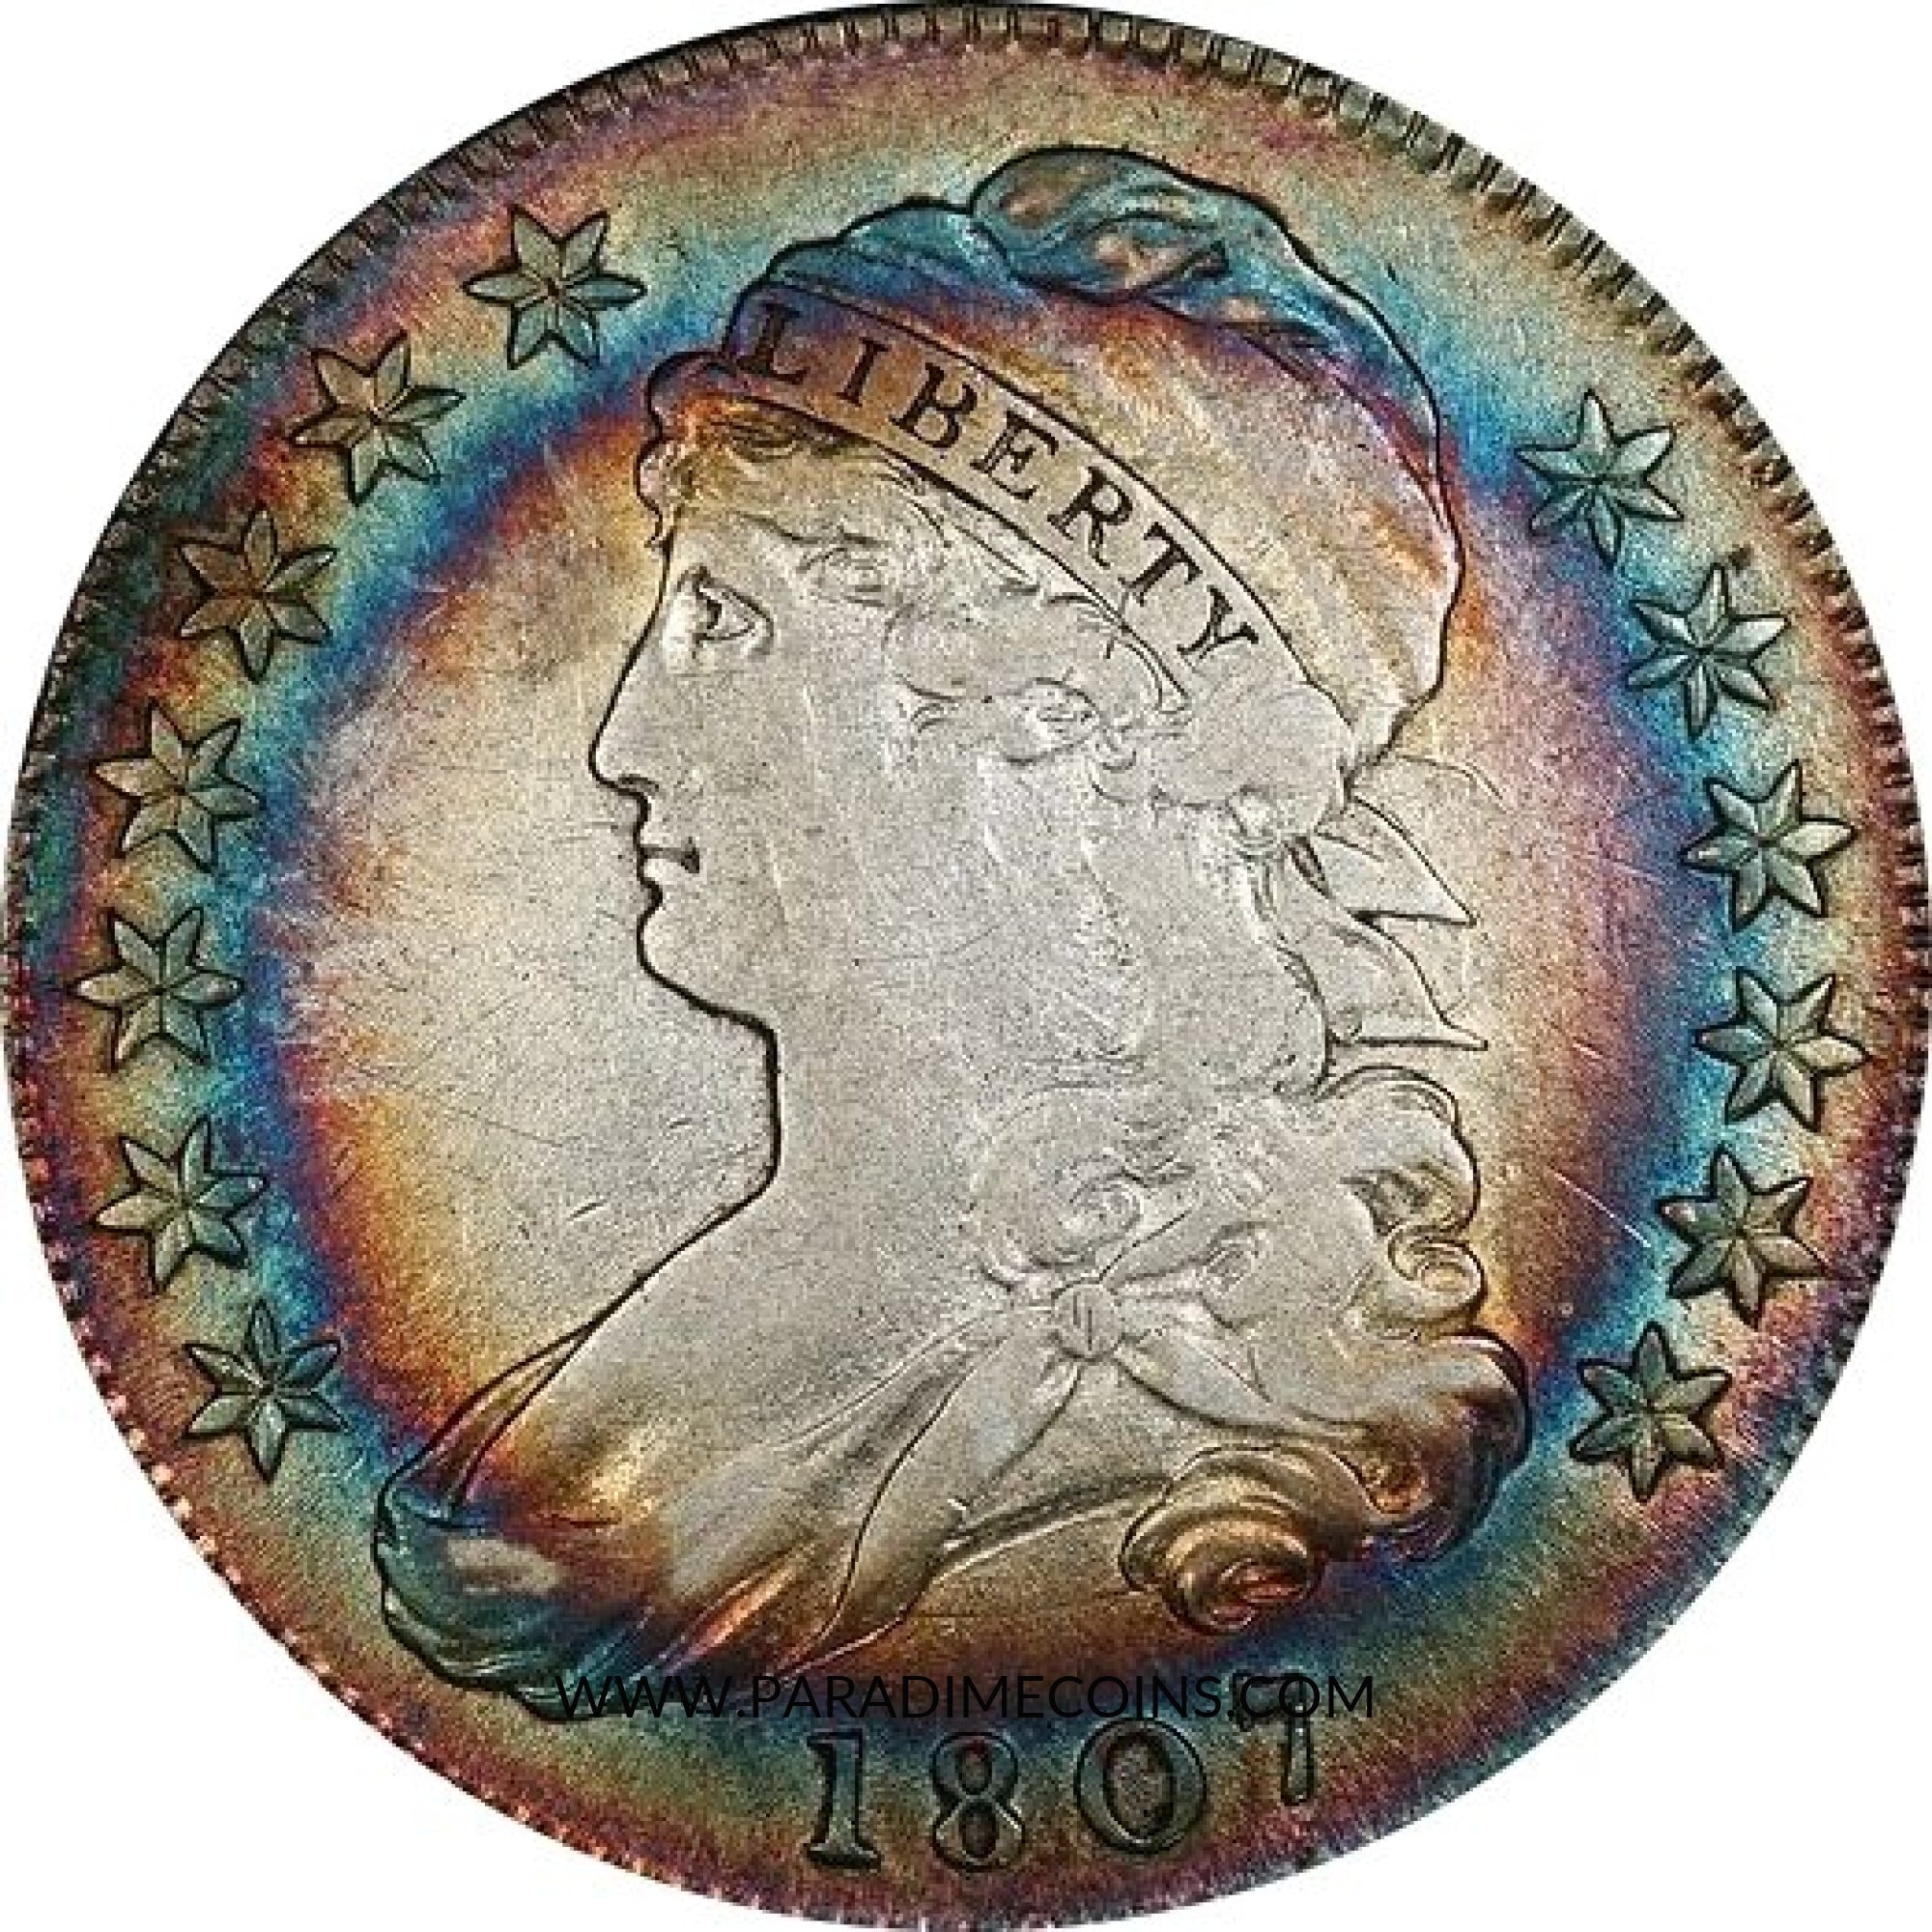 1807 50C LARGE STARS VF25 PCGS - Paradime Coins US Coins For Sale